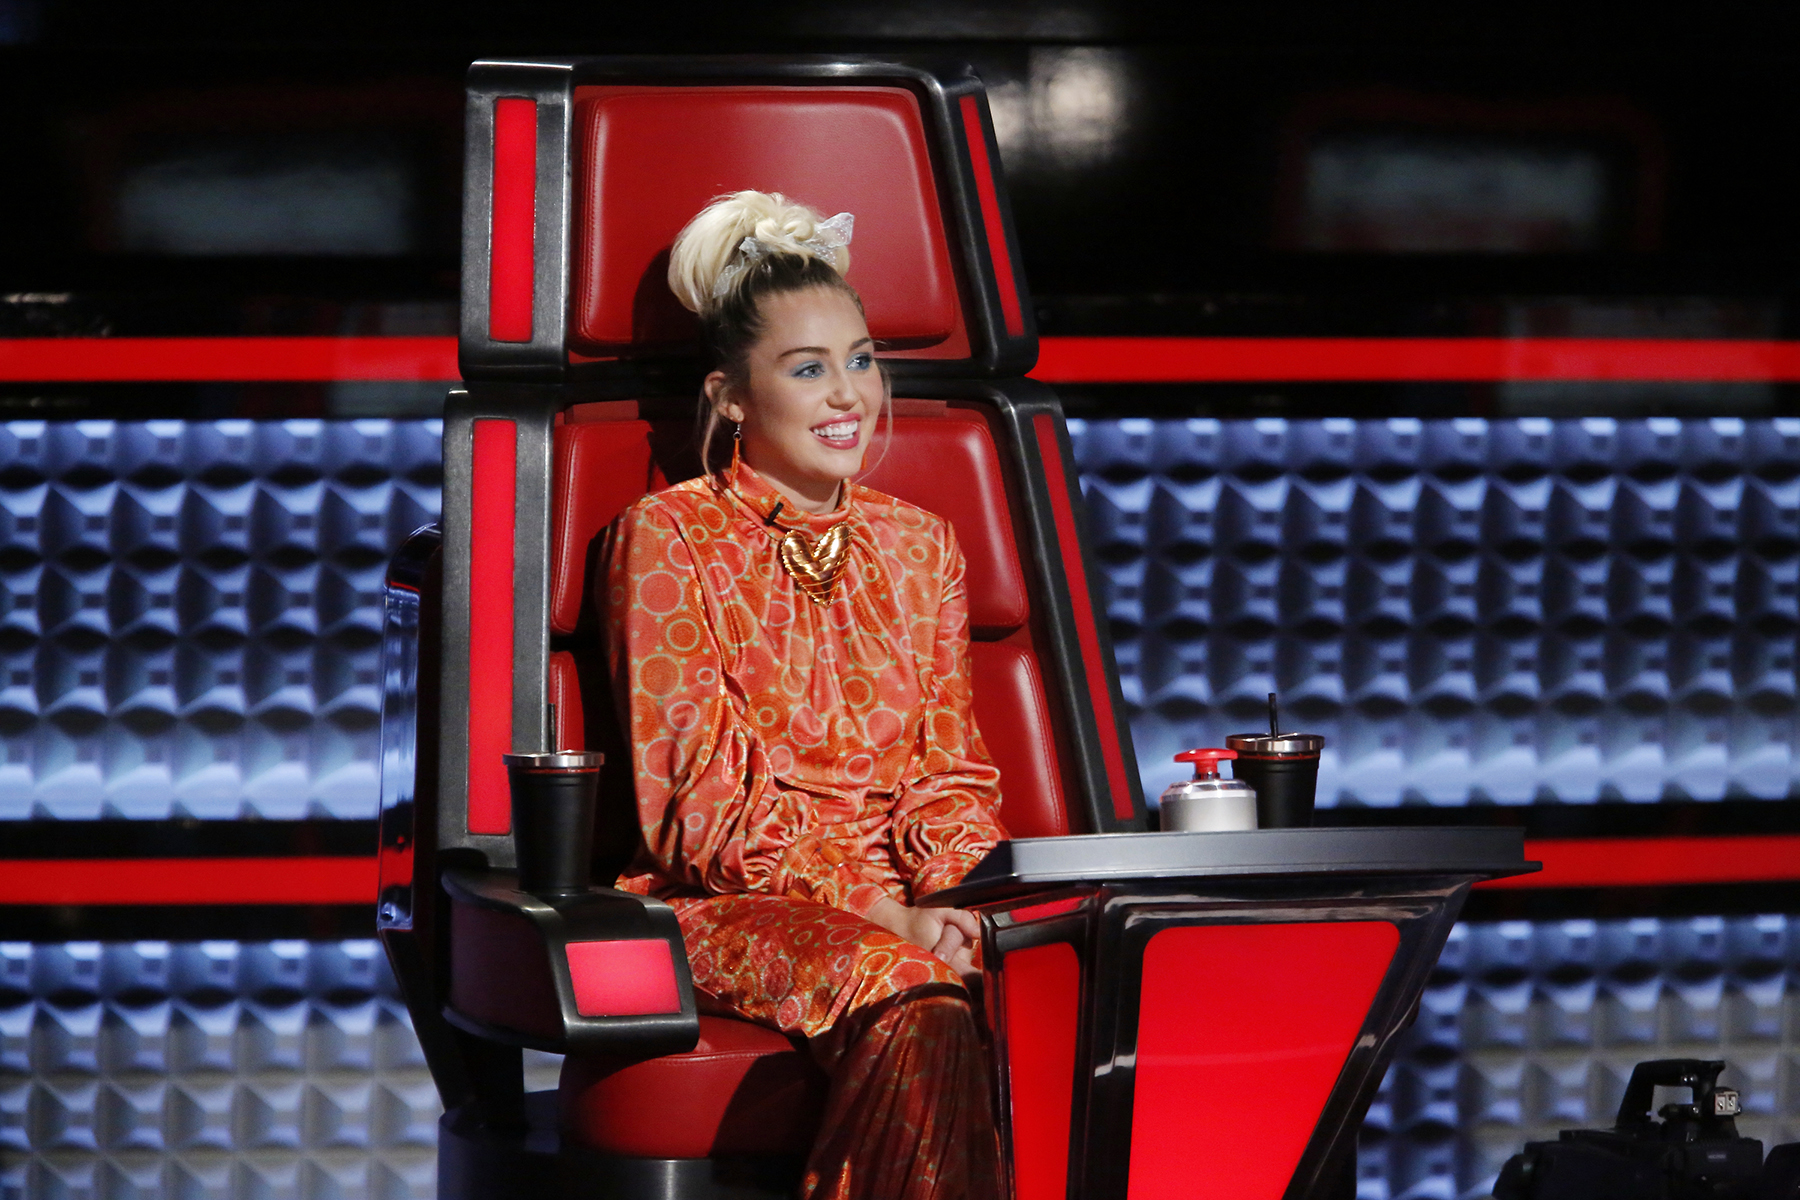 WATCH: Dolly Parton duets with goddaughter Miley Cyrus on The Voice